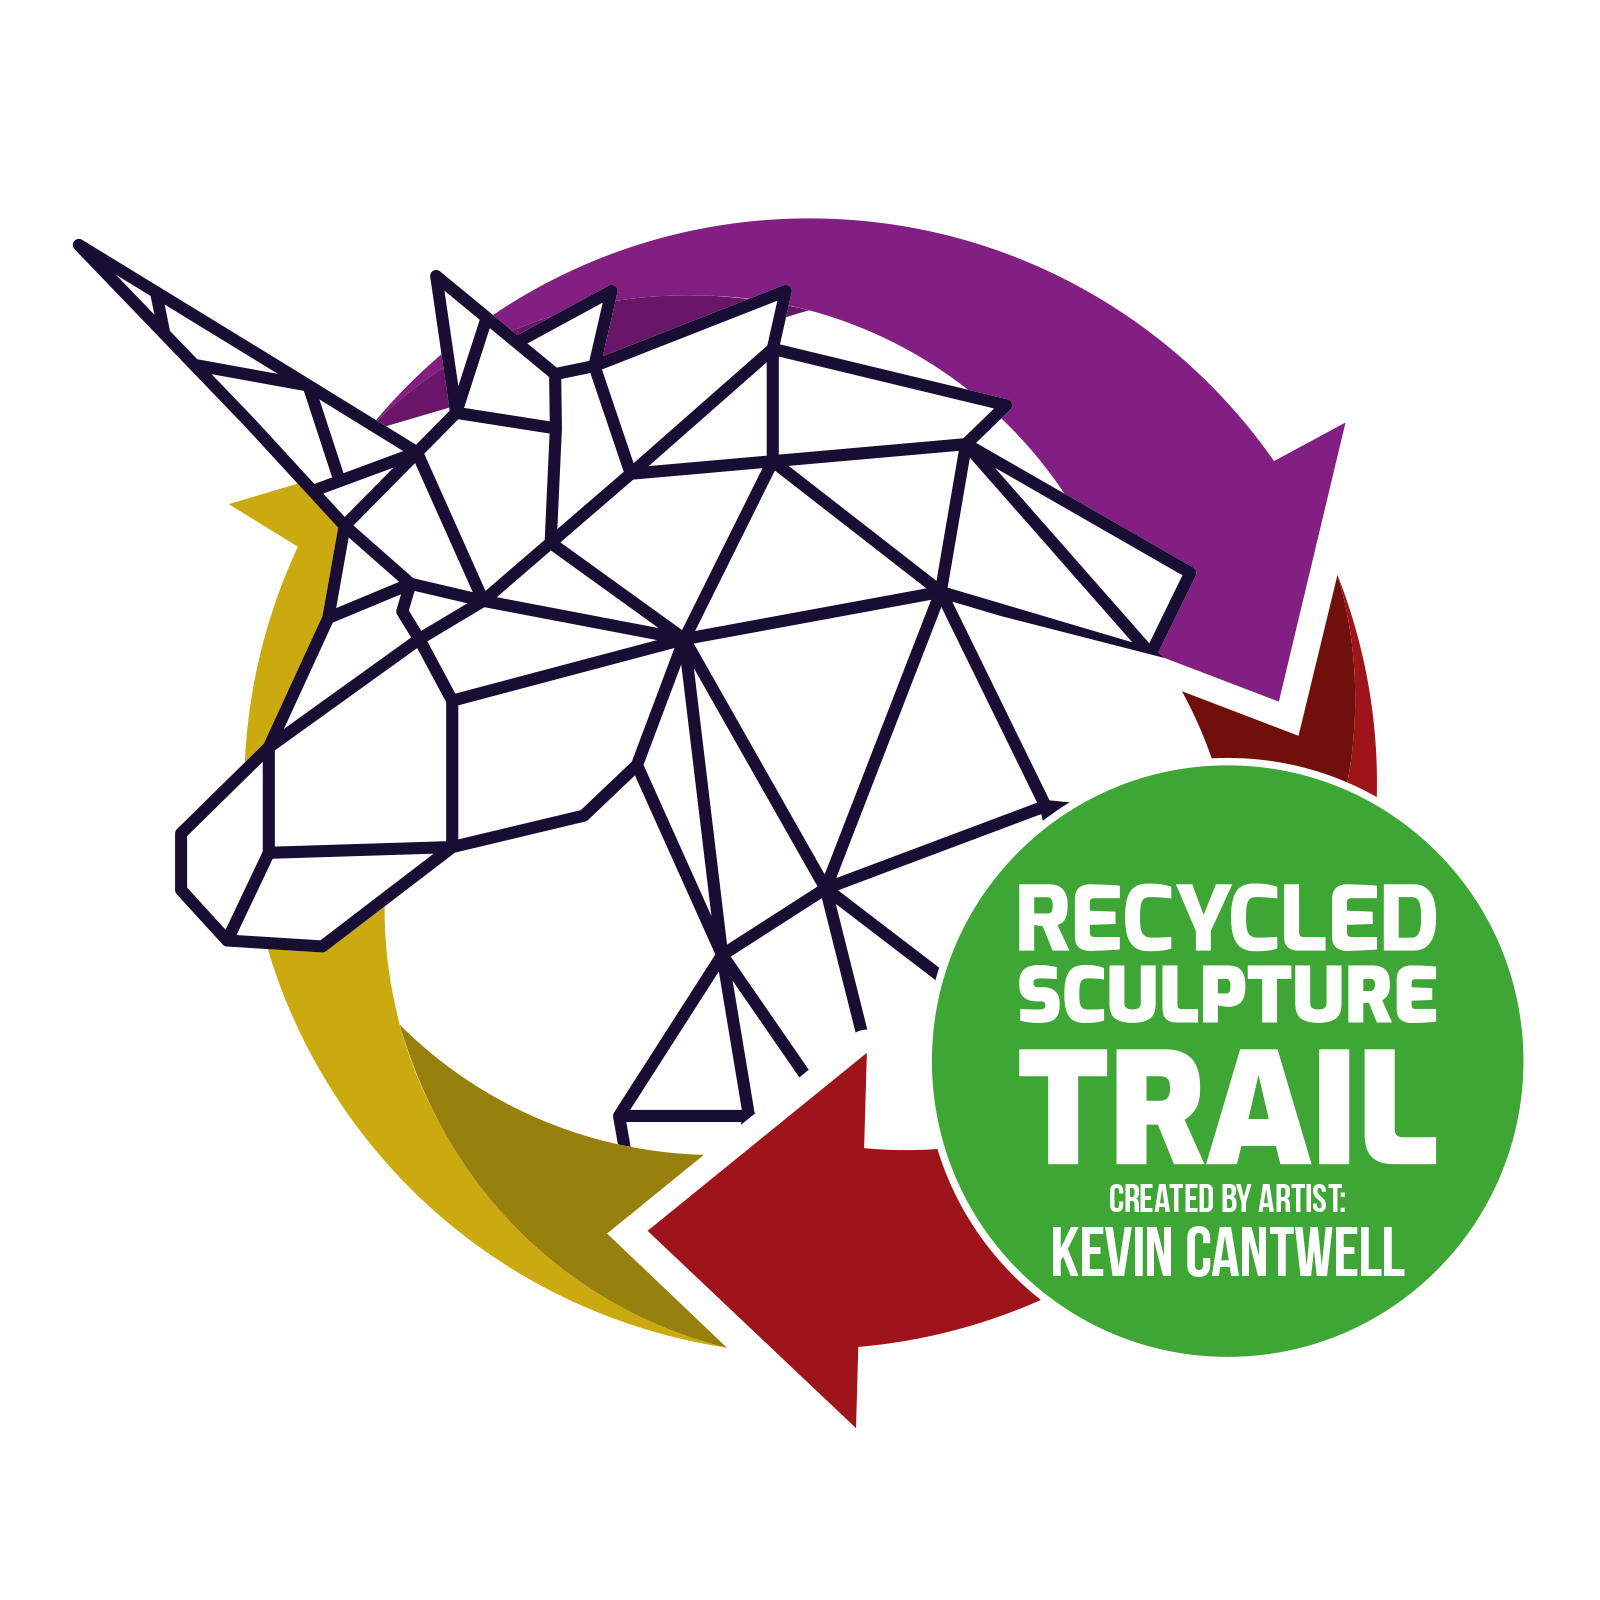 Paisley-First-Recycled-Sculpture-Logo-30-01-19